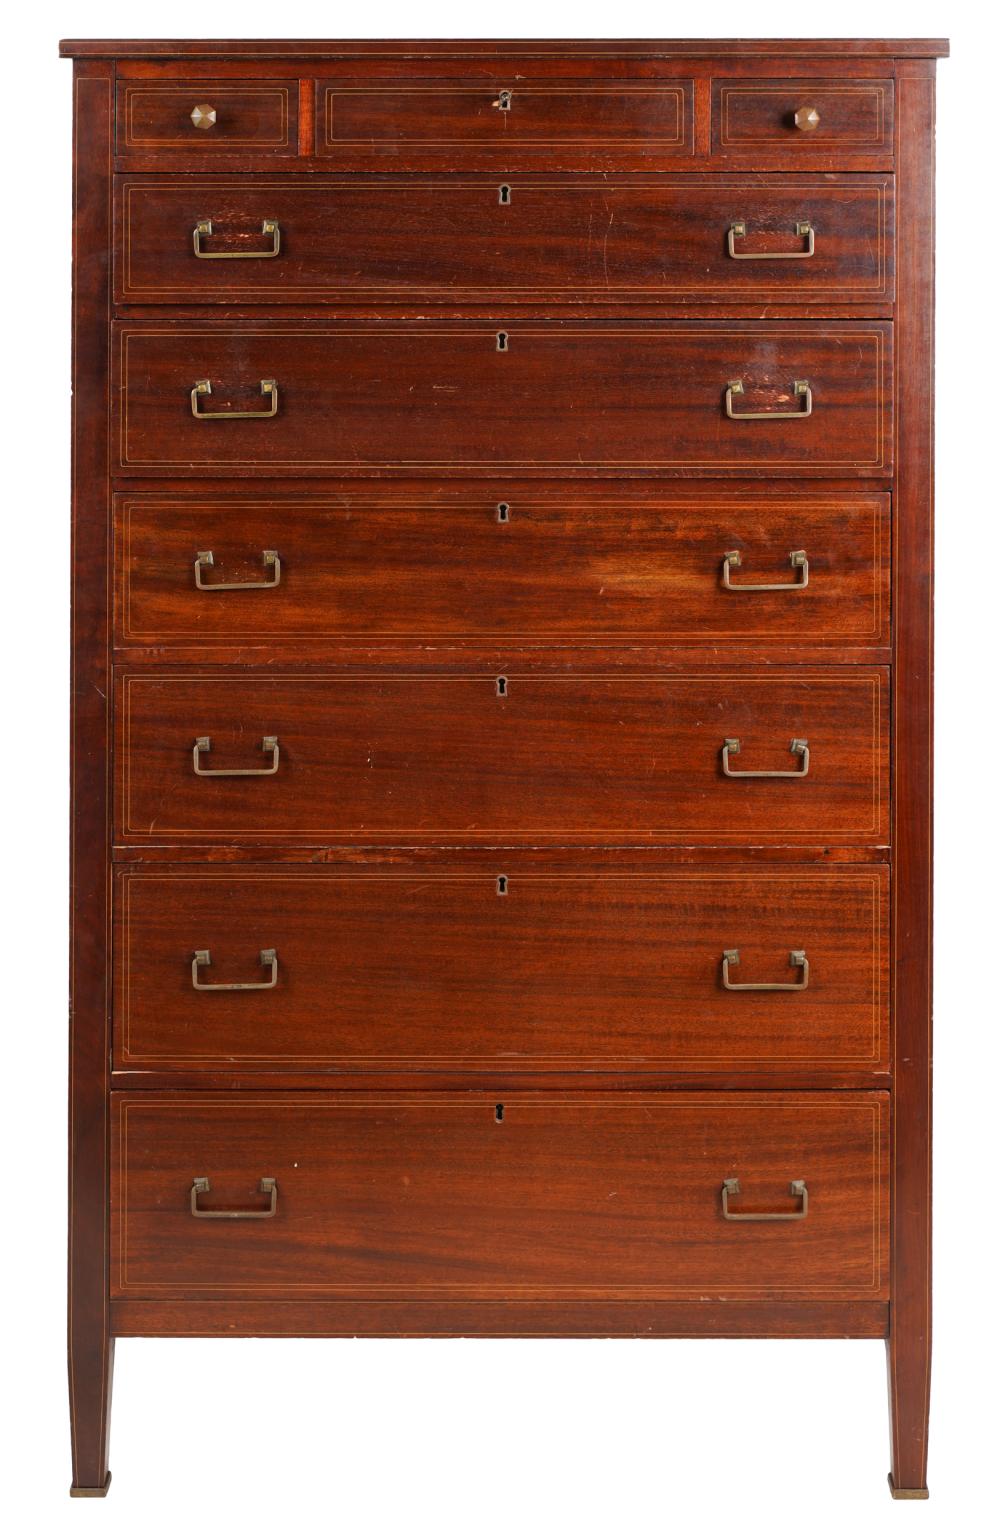 MAHOGANY TALL CHEST OF DRAWERSthe